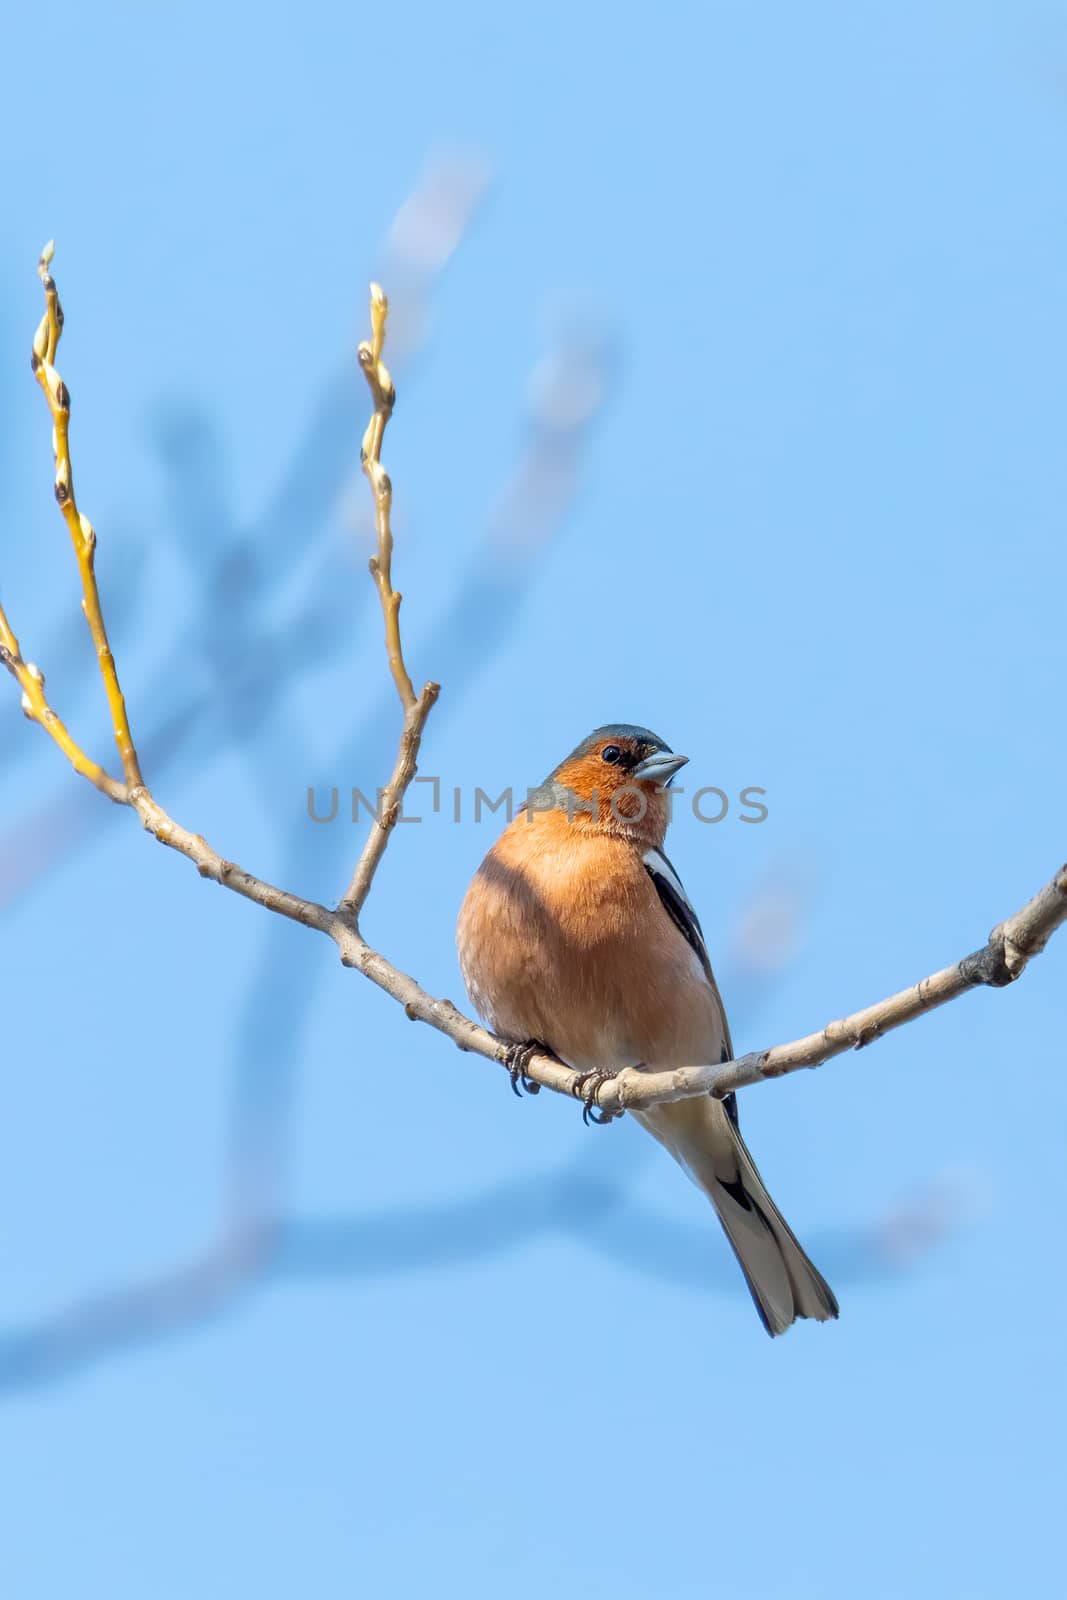 beautiful small beautiful bird, common chaffinch (Fringilla coelebs) perched on the branch, songbird in nature. Europe Czech Republic wildlife